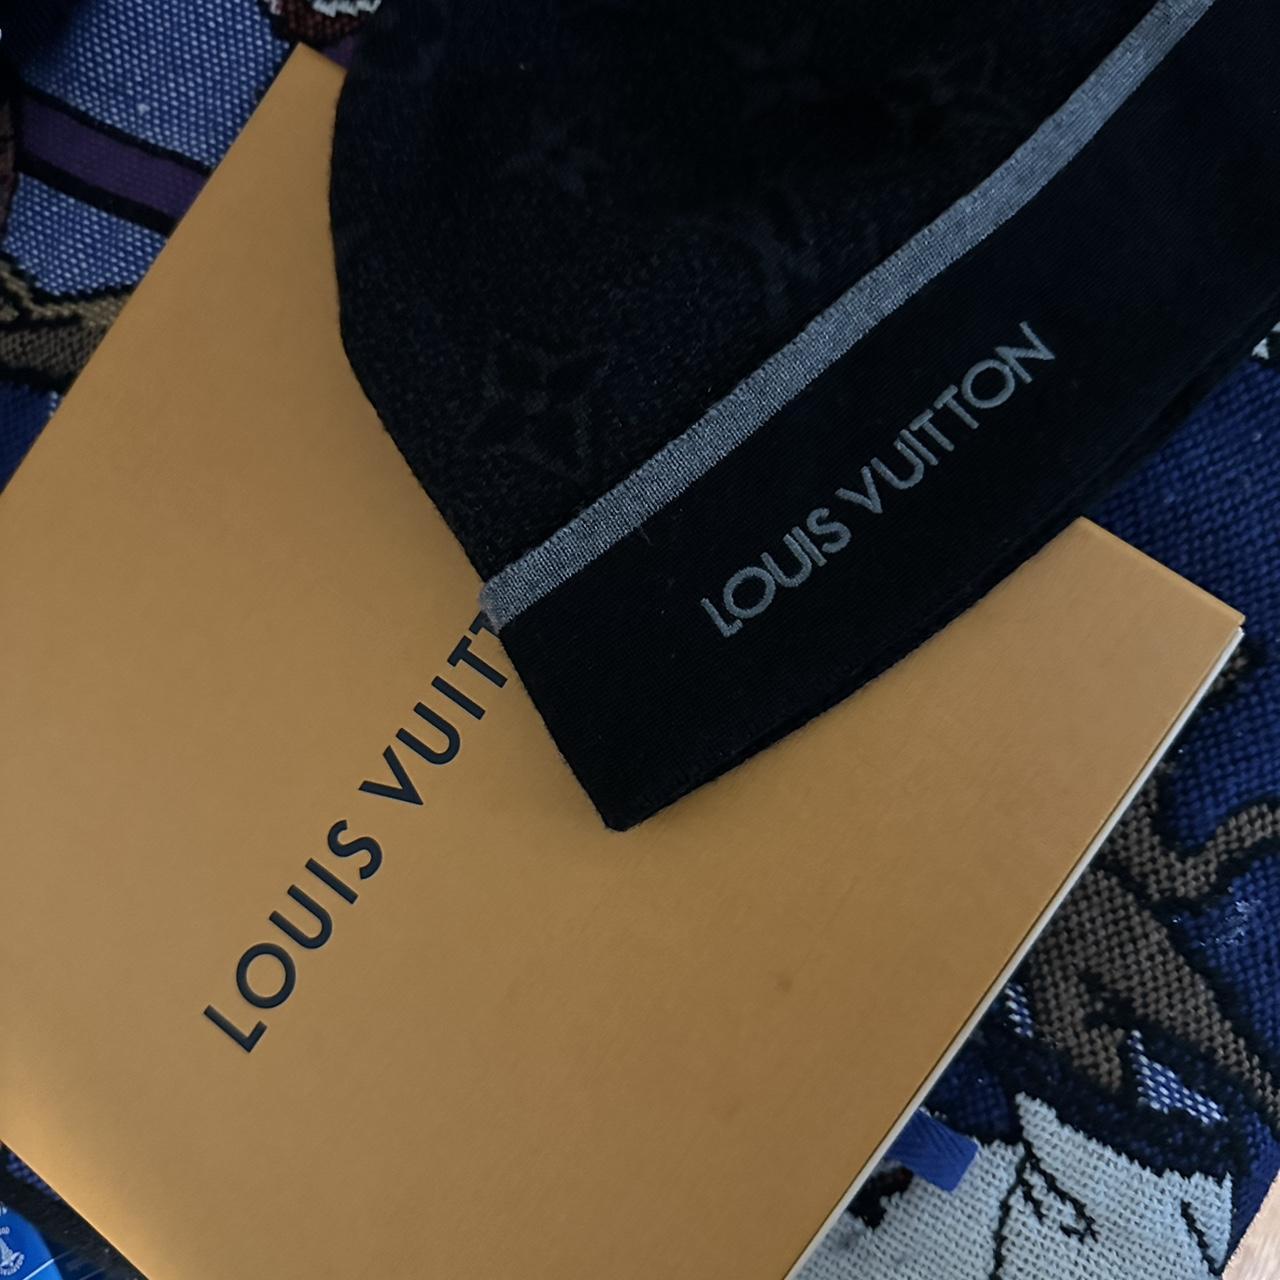 LOUIS VUITTON BEANIE So cute. Happy to answer any - Depop